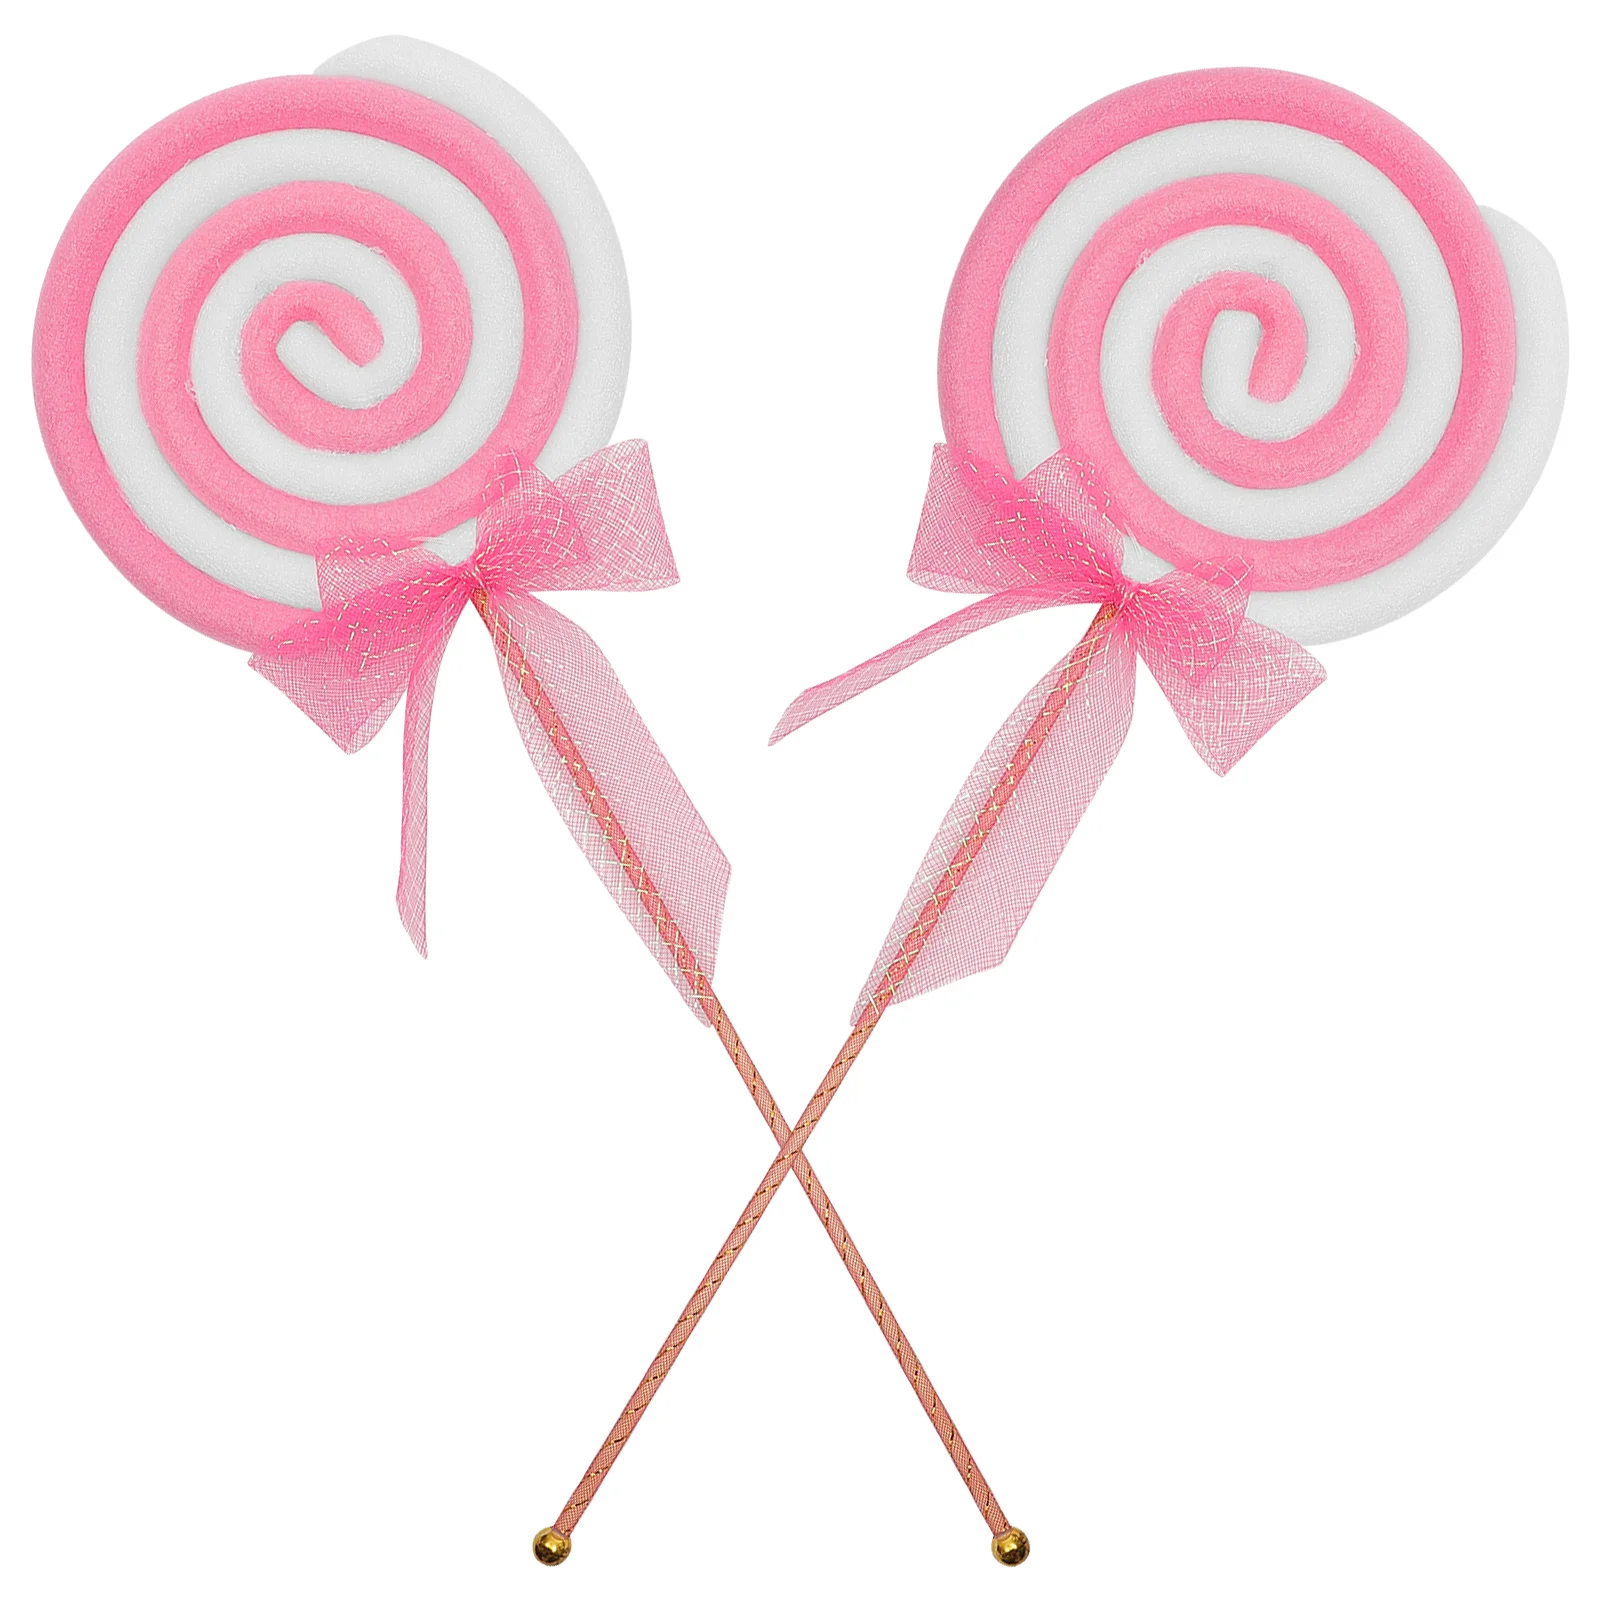 

Simulation Lollipop Props Party Festival Fake Food Candy Adornment Photography Inflatable Wedding Festival Party Decoration